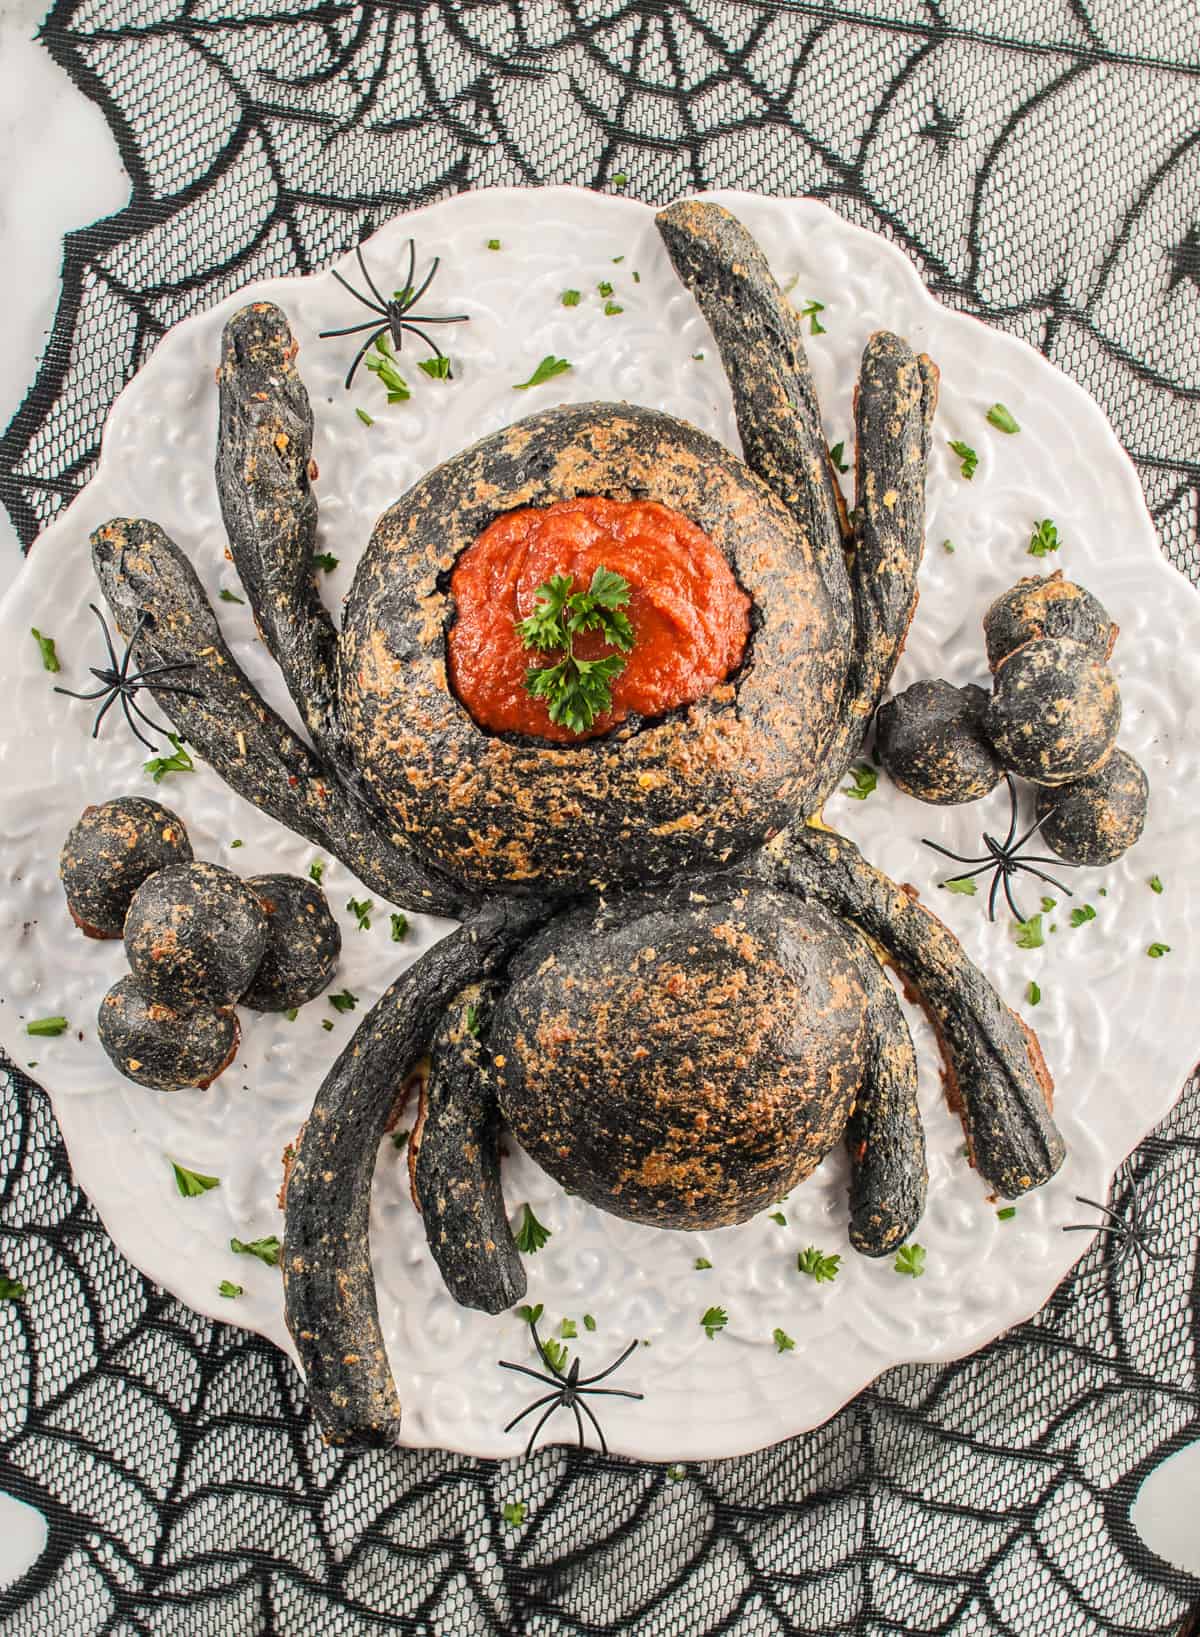 A black spider bread bowl filled with marinara sauce for dipping.